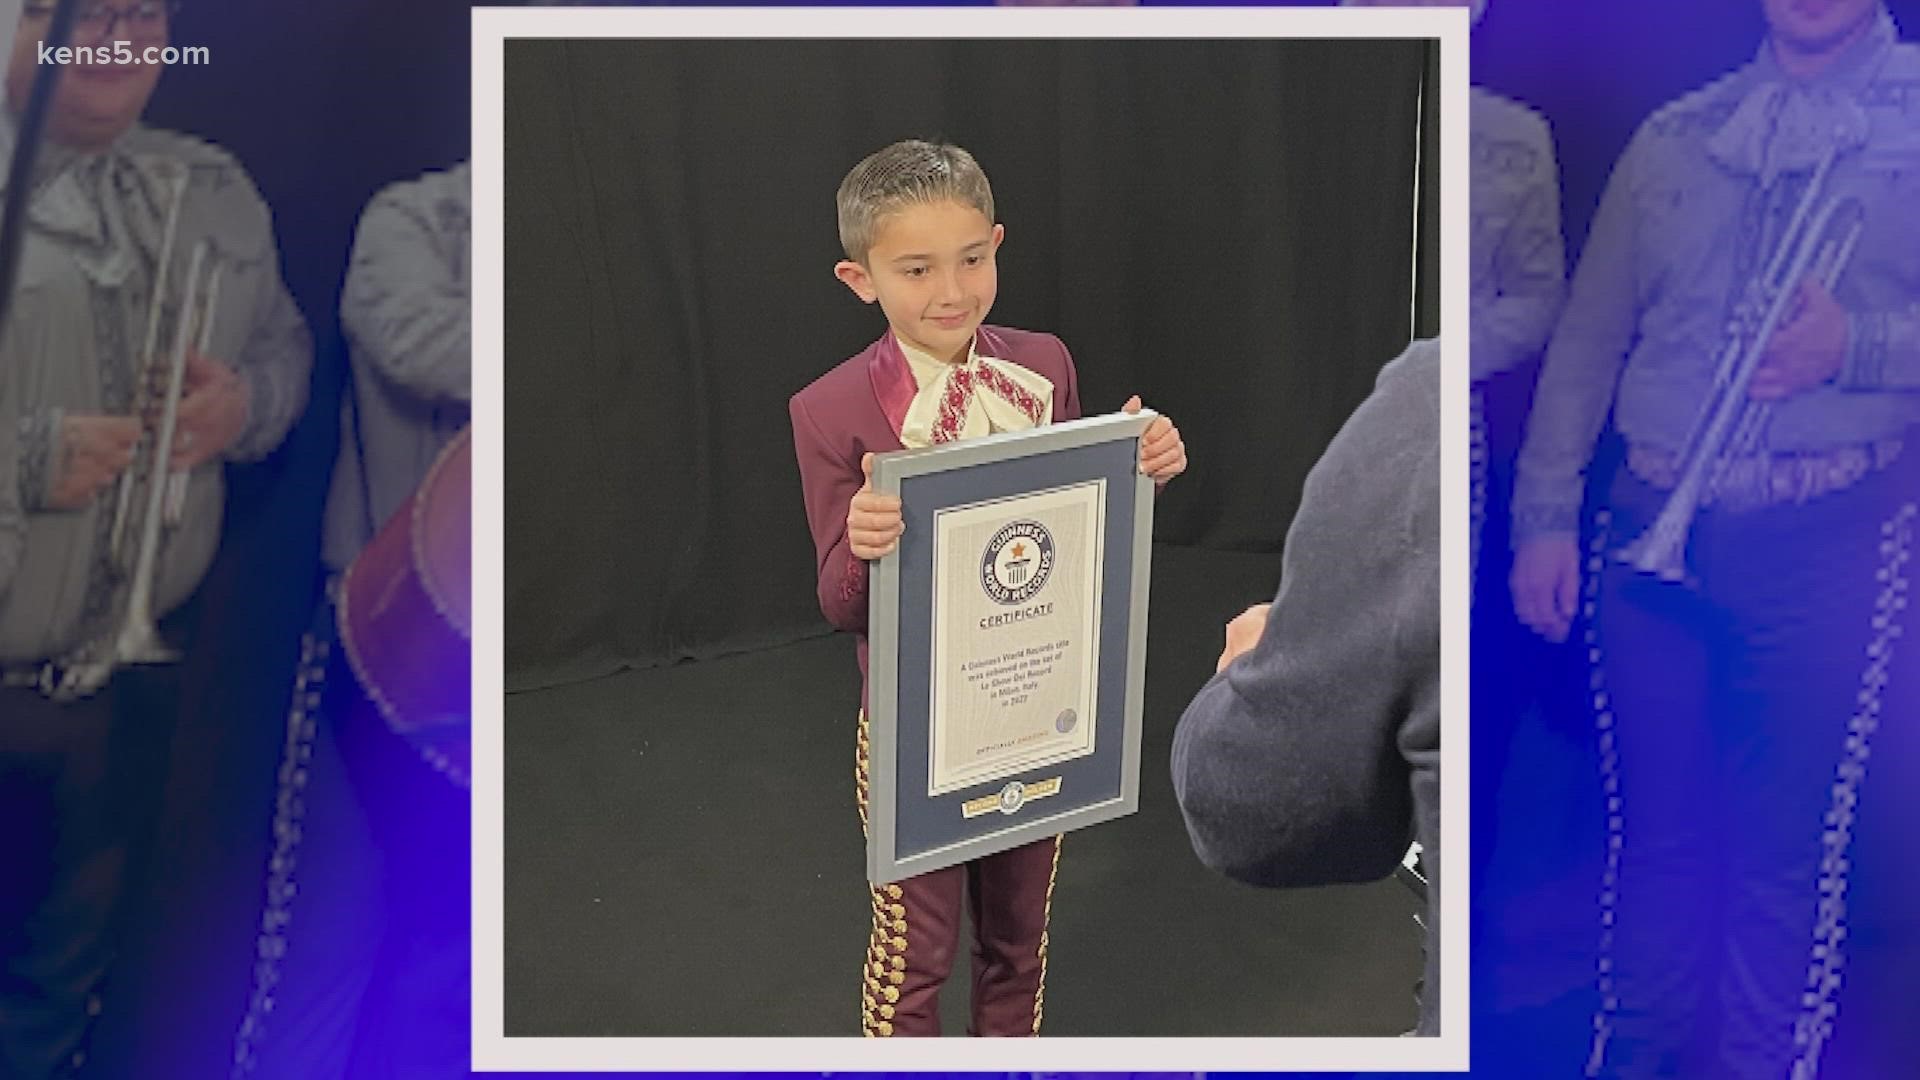 Mateo Lopez thought he was flying to Italy to perform. But his parents didn't tell him it was for his induction into the Guinness Book of World Records.